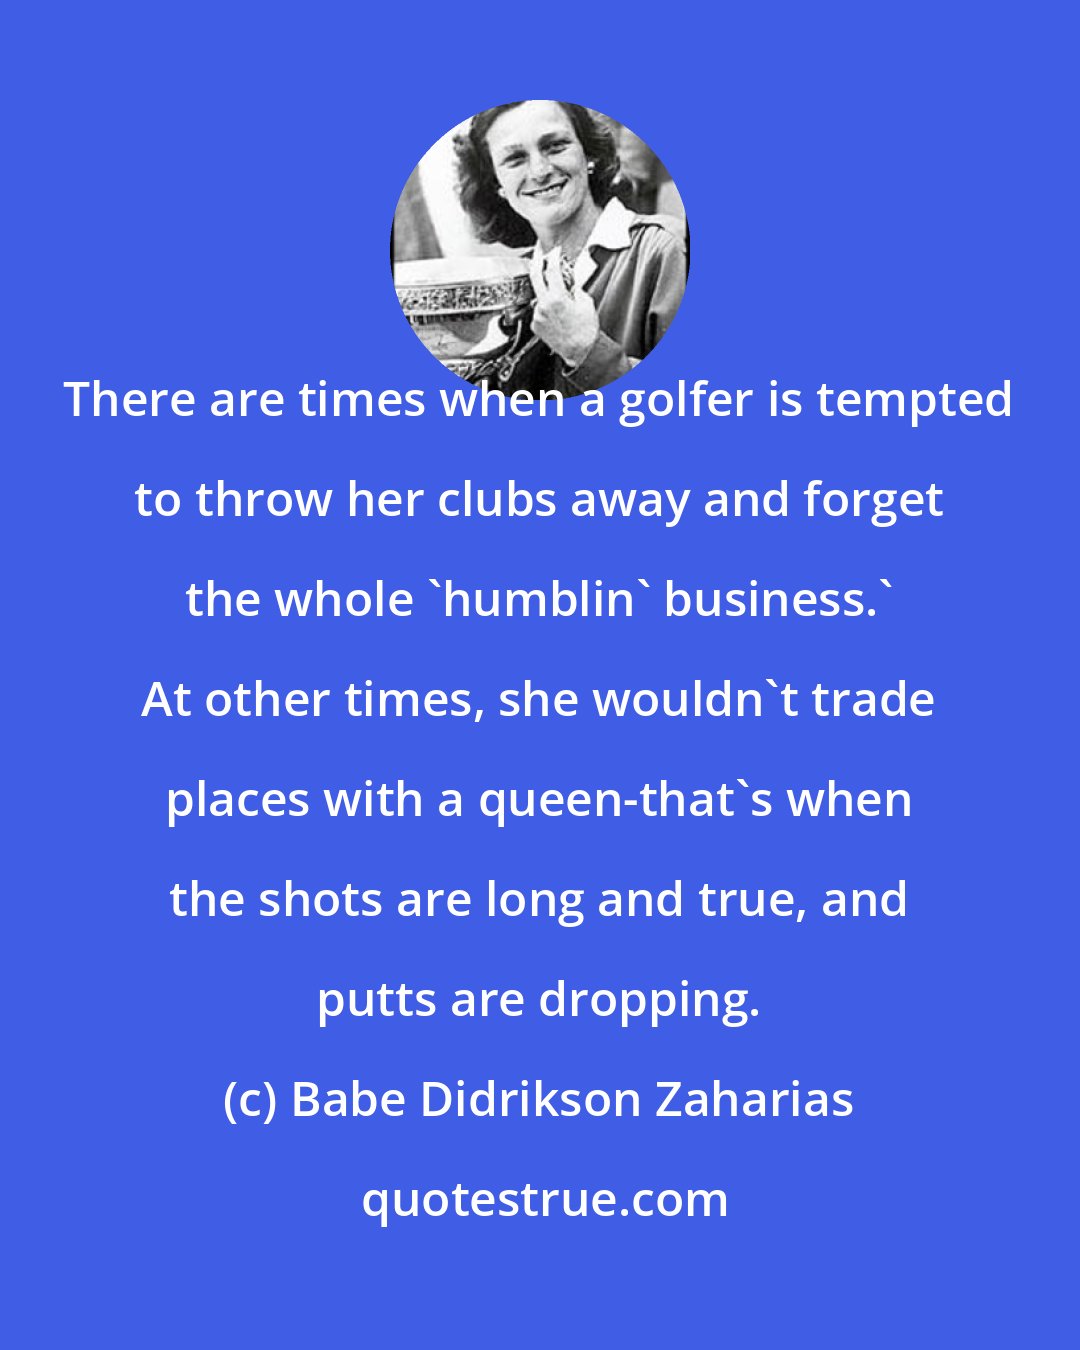 Babe Didrikson Zaharias: There are times when a golfer is tempted to throw her clubs away and forget the whole 'humblin' business.' At other times, she wouldn't trade places with a queen-that's when the shots are long and true, and putts are dropping.